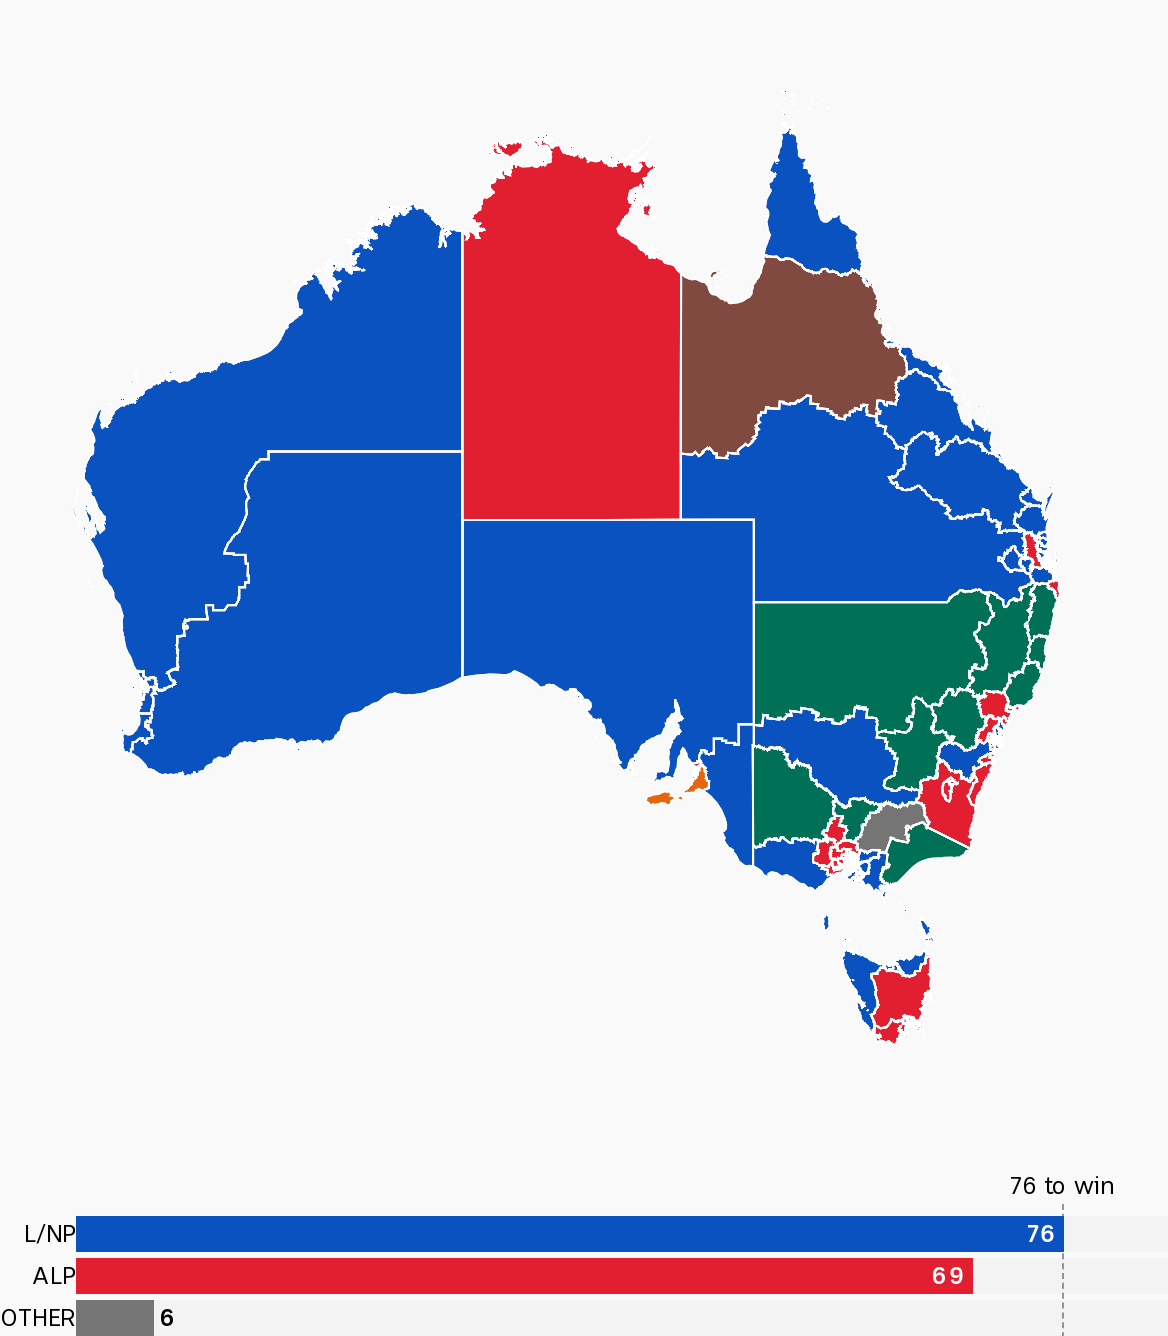 The map looks largely blue and green, but the chart shows that the Coalition only just made the required 76 seats.